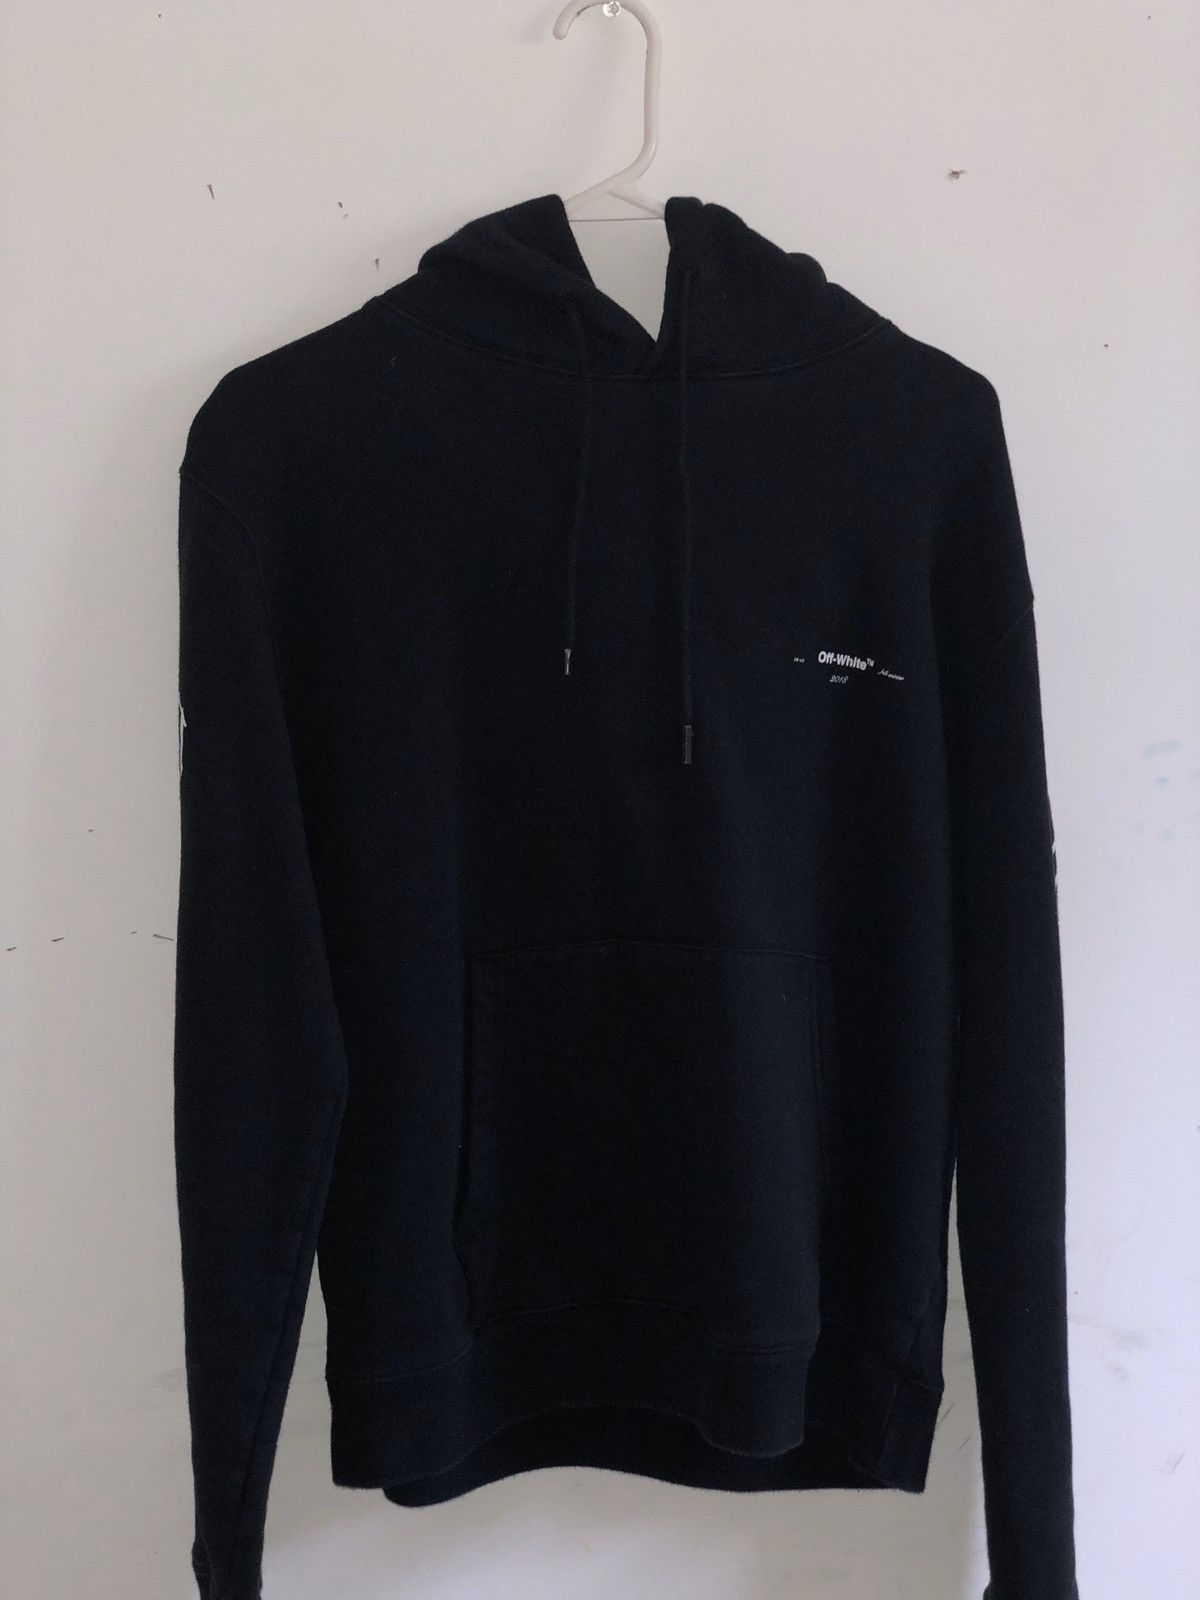 Off-White Off-White Marker Arrows Hoodie Size US S / EU 44-46 / 1 - 2 Preview